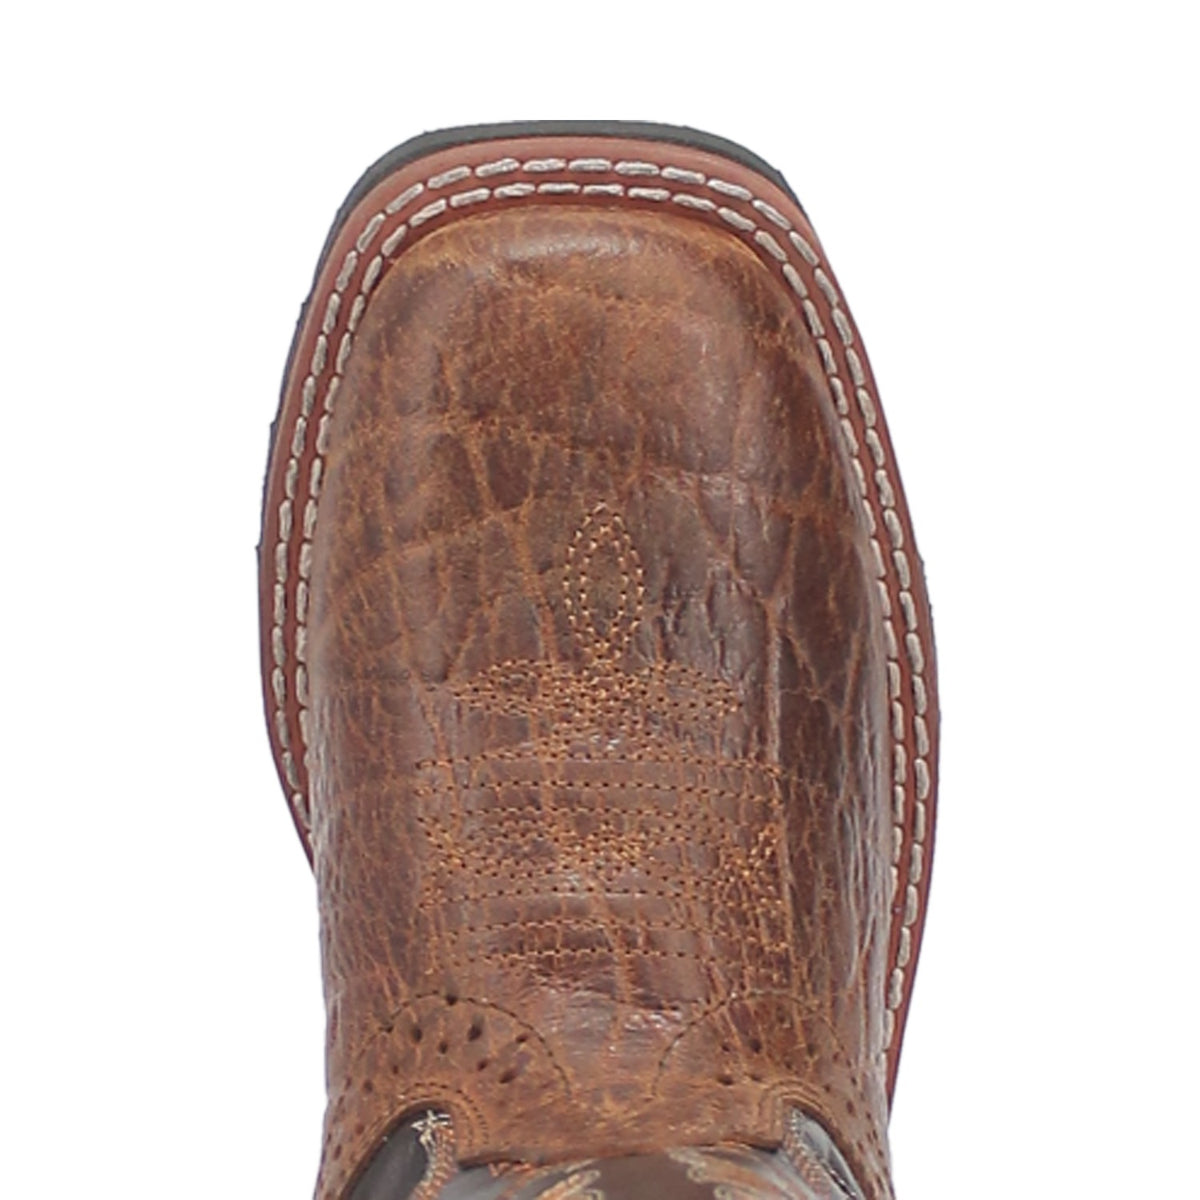 LIL' BROKEN BOW LEATHER CHILDREN'S BOOT Cover